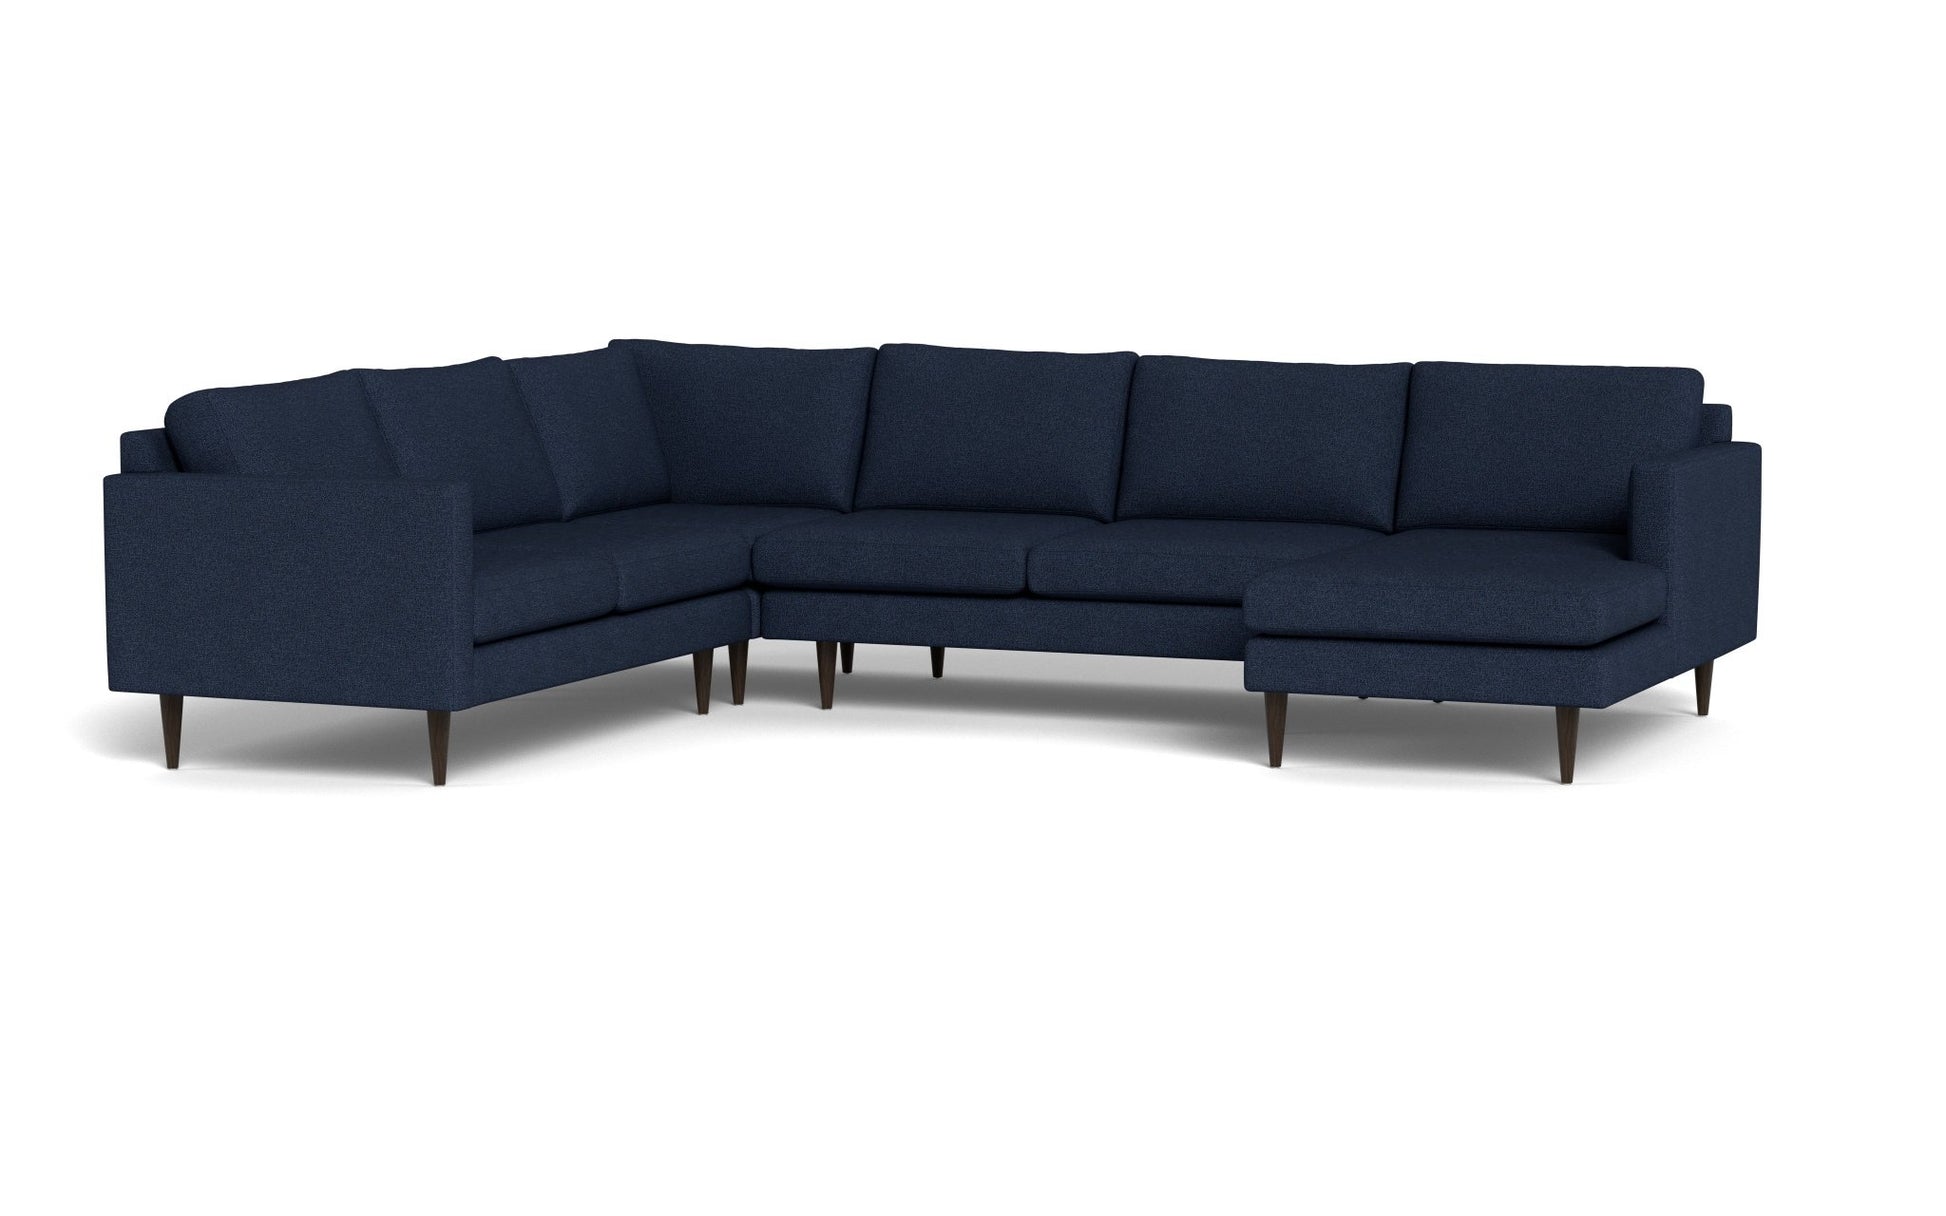 Wallace Untufted Corner Sectional w. Right Chaise - Sugarshack Navy